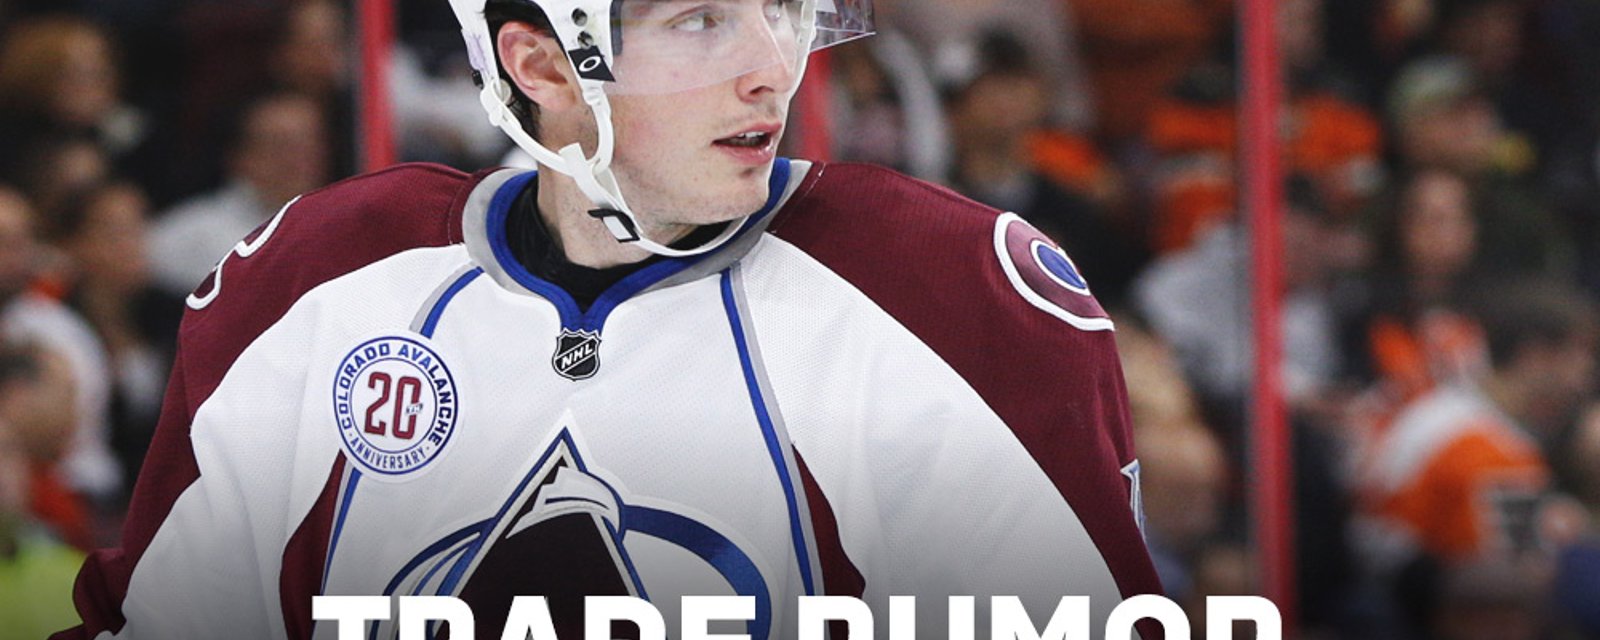 Breaking: Talented young NHL defenseman may be a piece in trade for Matt Duchene.